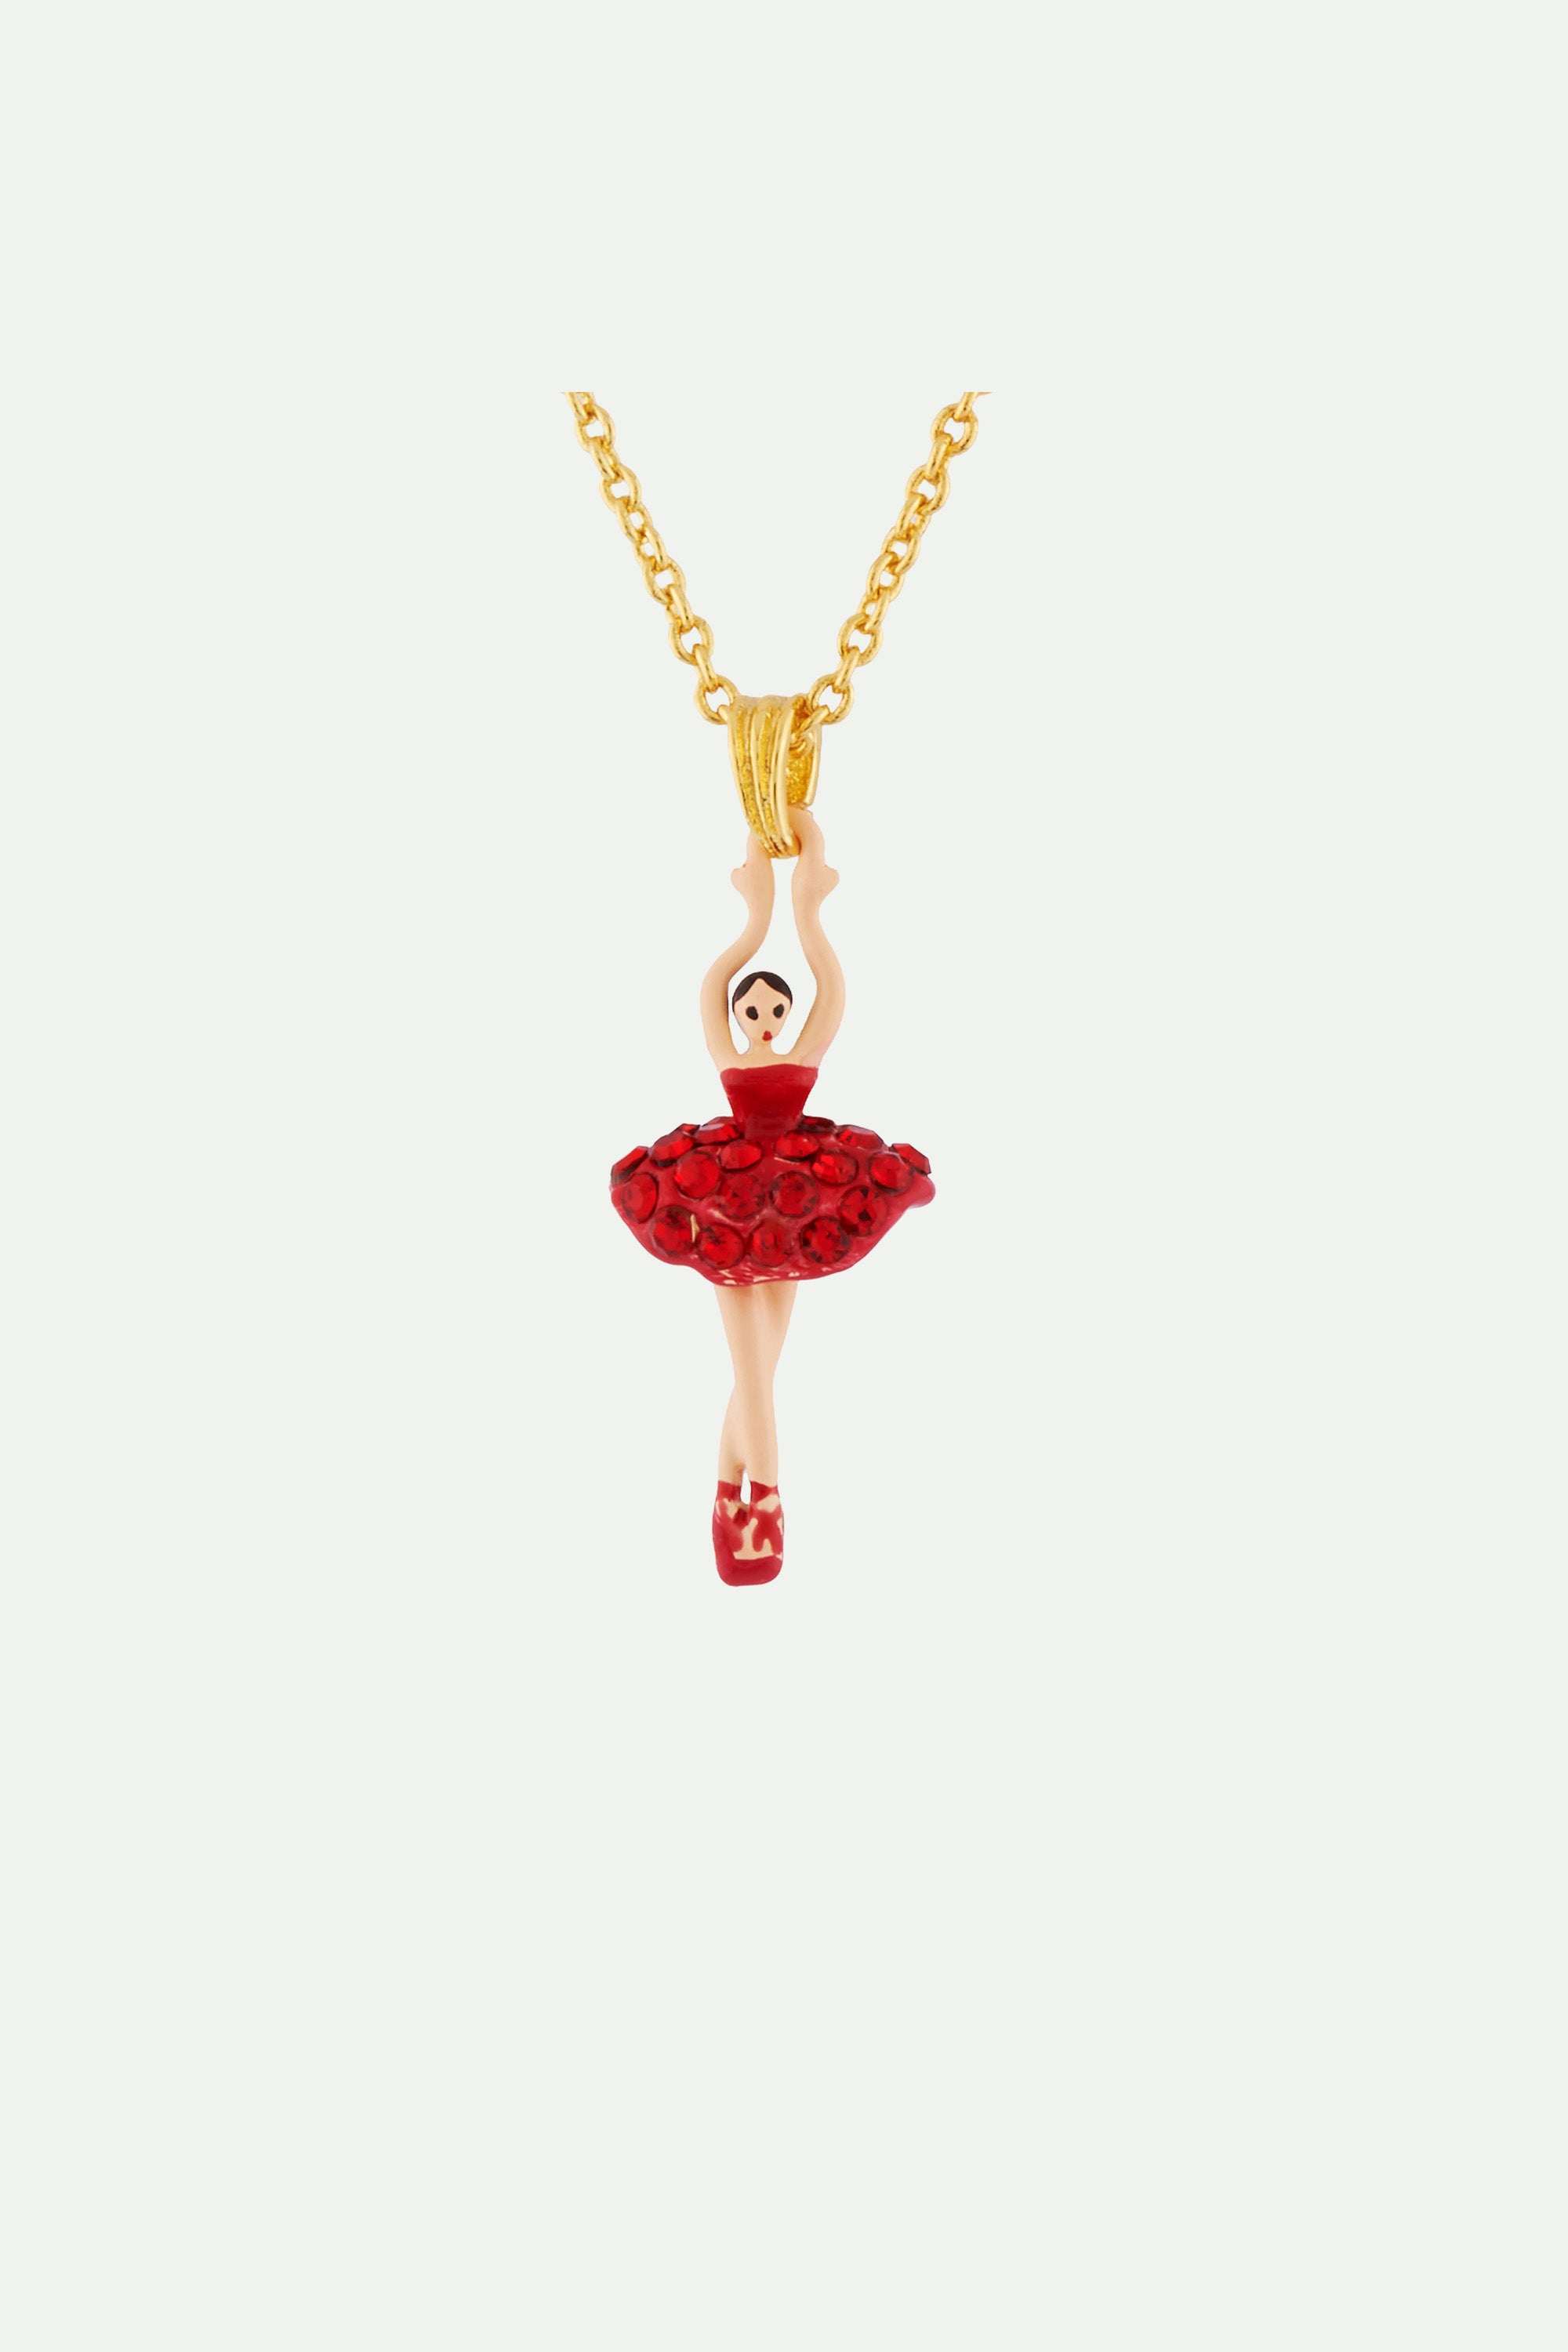 Necklace mini-ballerina wearing a tutu paved with red rhinestones